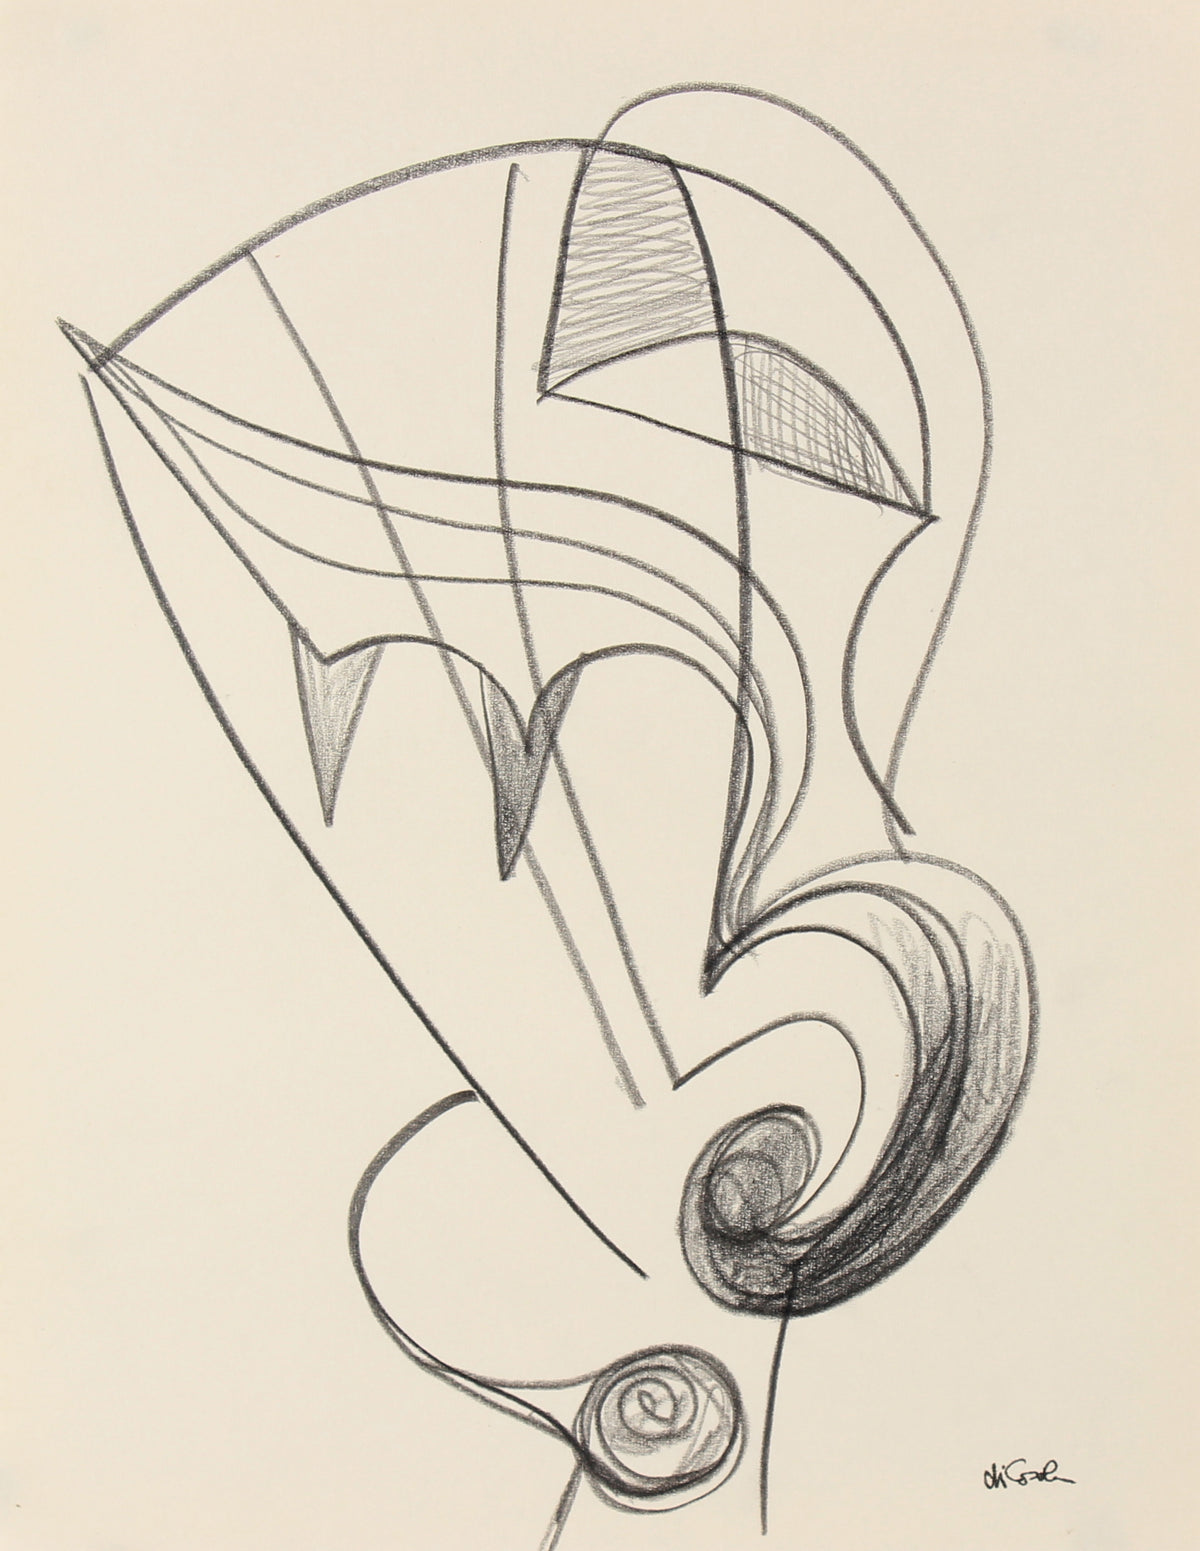 Undulating Surreal Abstract &lt;br&gt;Late 20th Century Graphite &lt;br&gt;&lt;br&gt;#83784